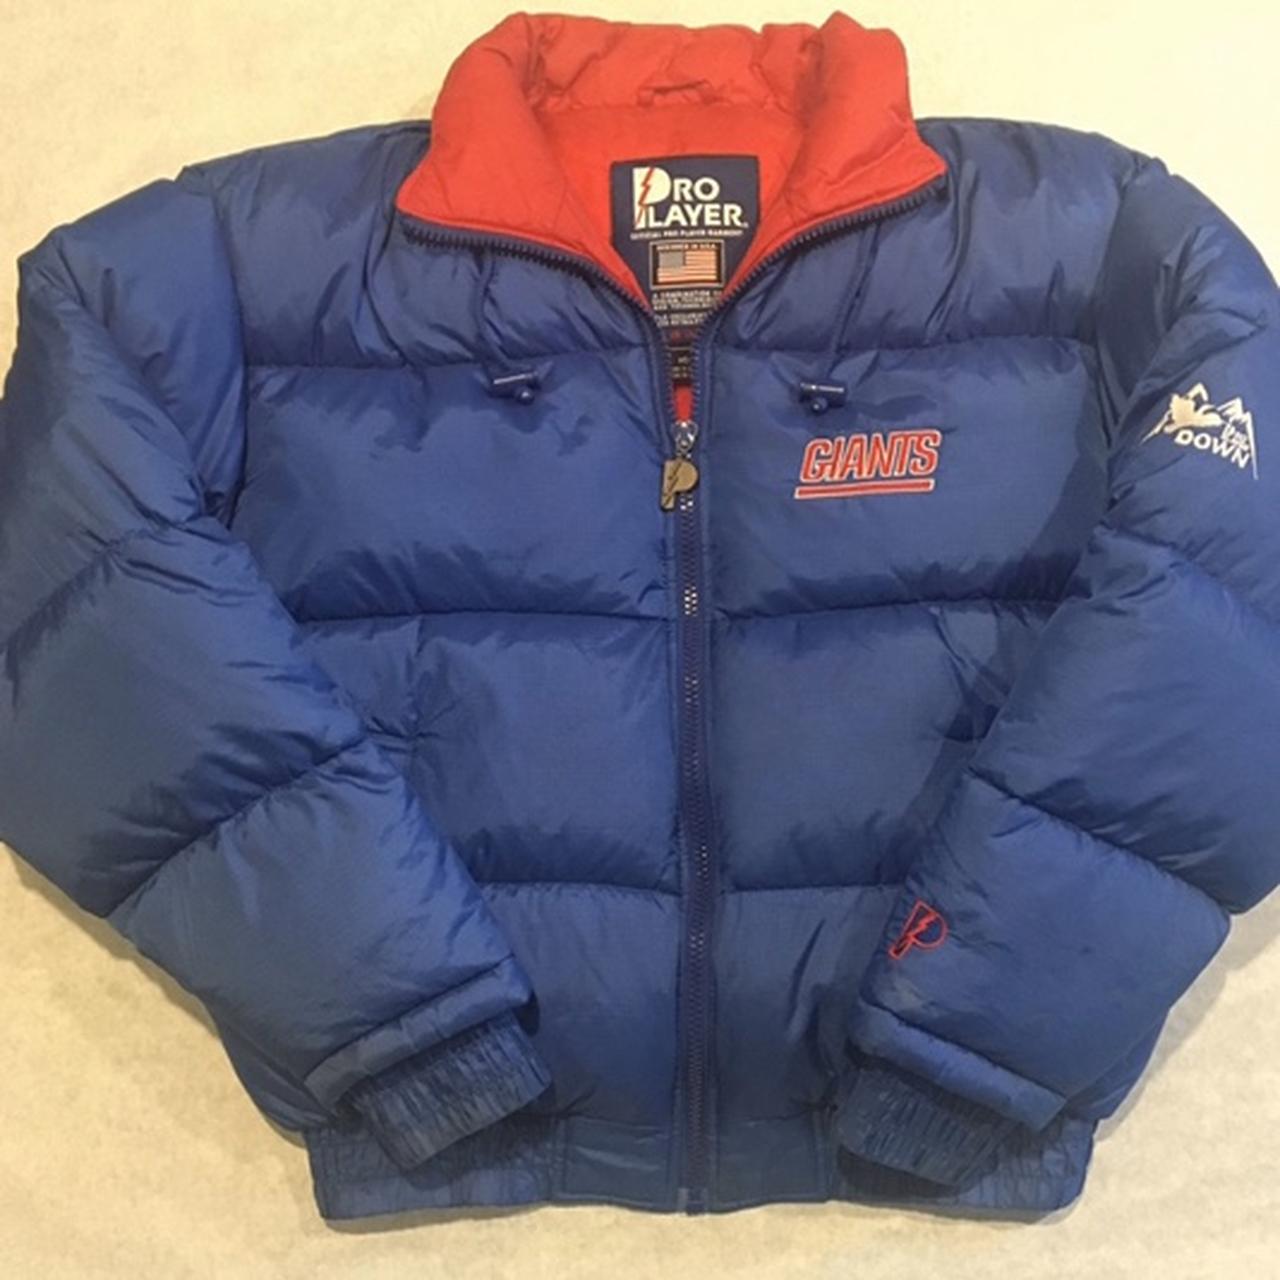 The North Face Women's Blue and Navy Jacket | Depop